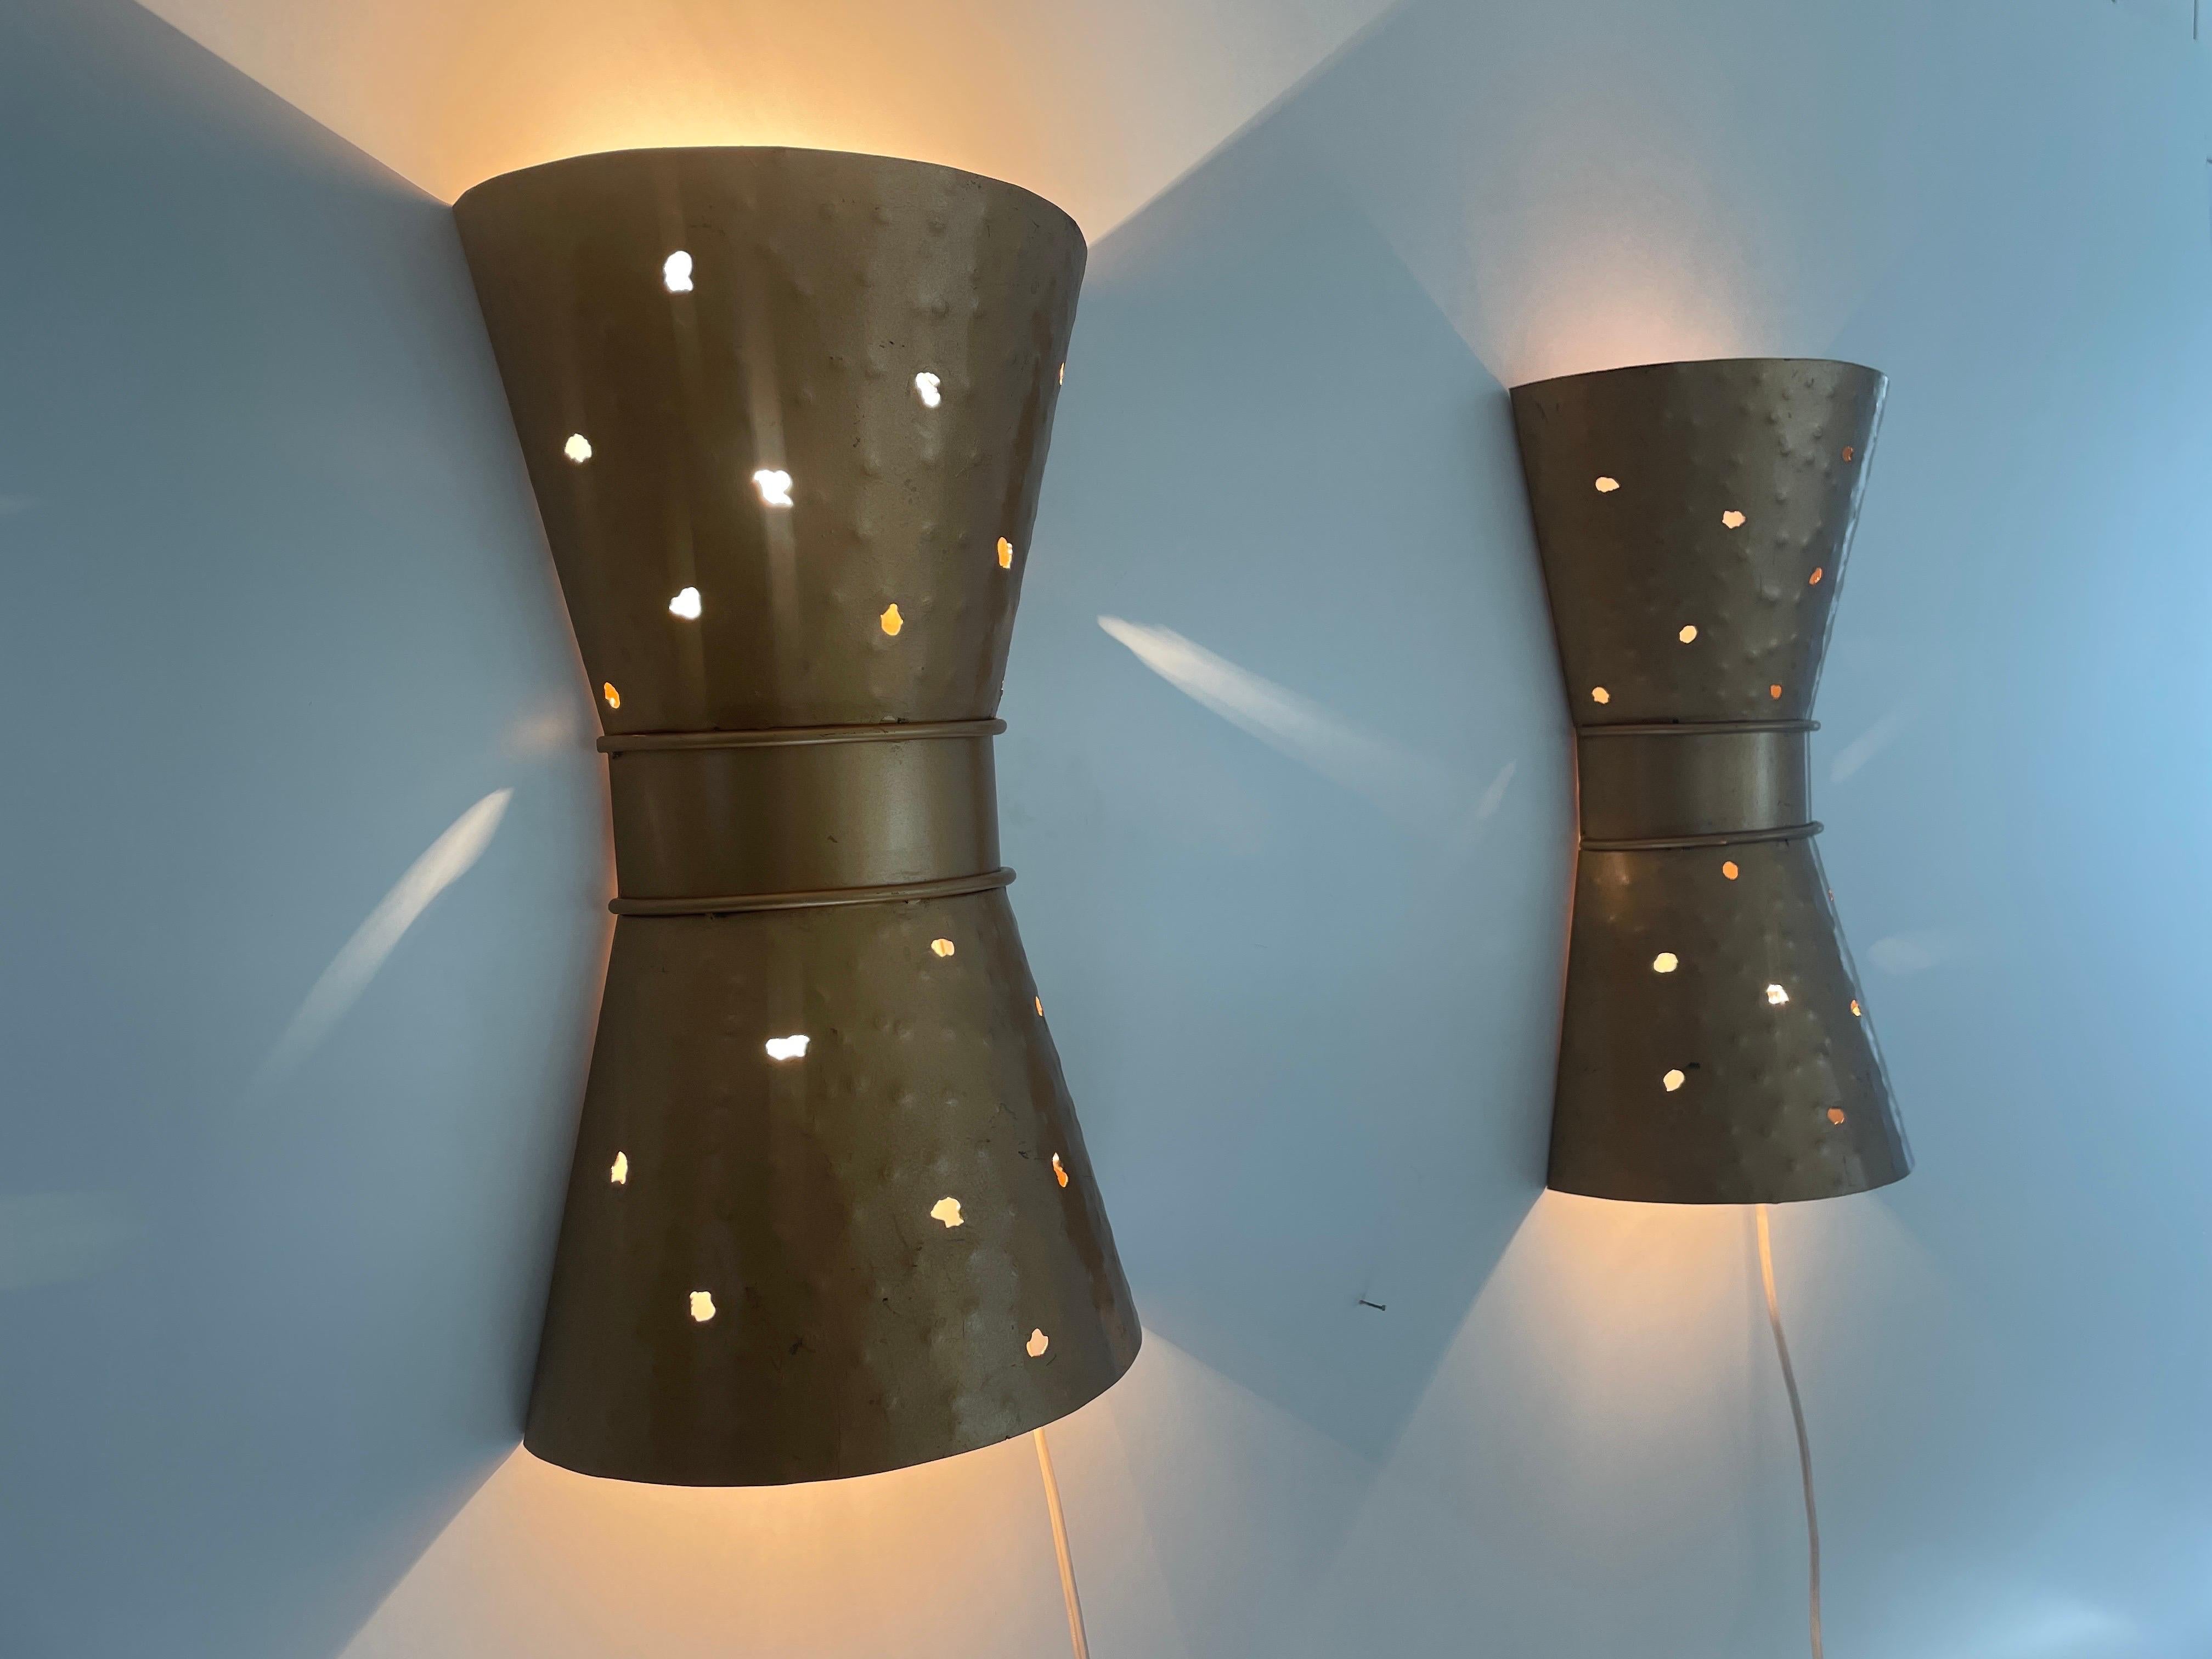 Diabolo Style Design Hand-crafted Pair of Sconces, 1970s, Germany For Sale 7